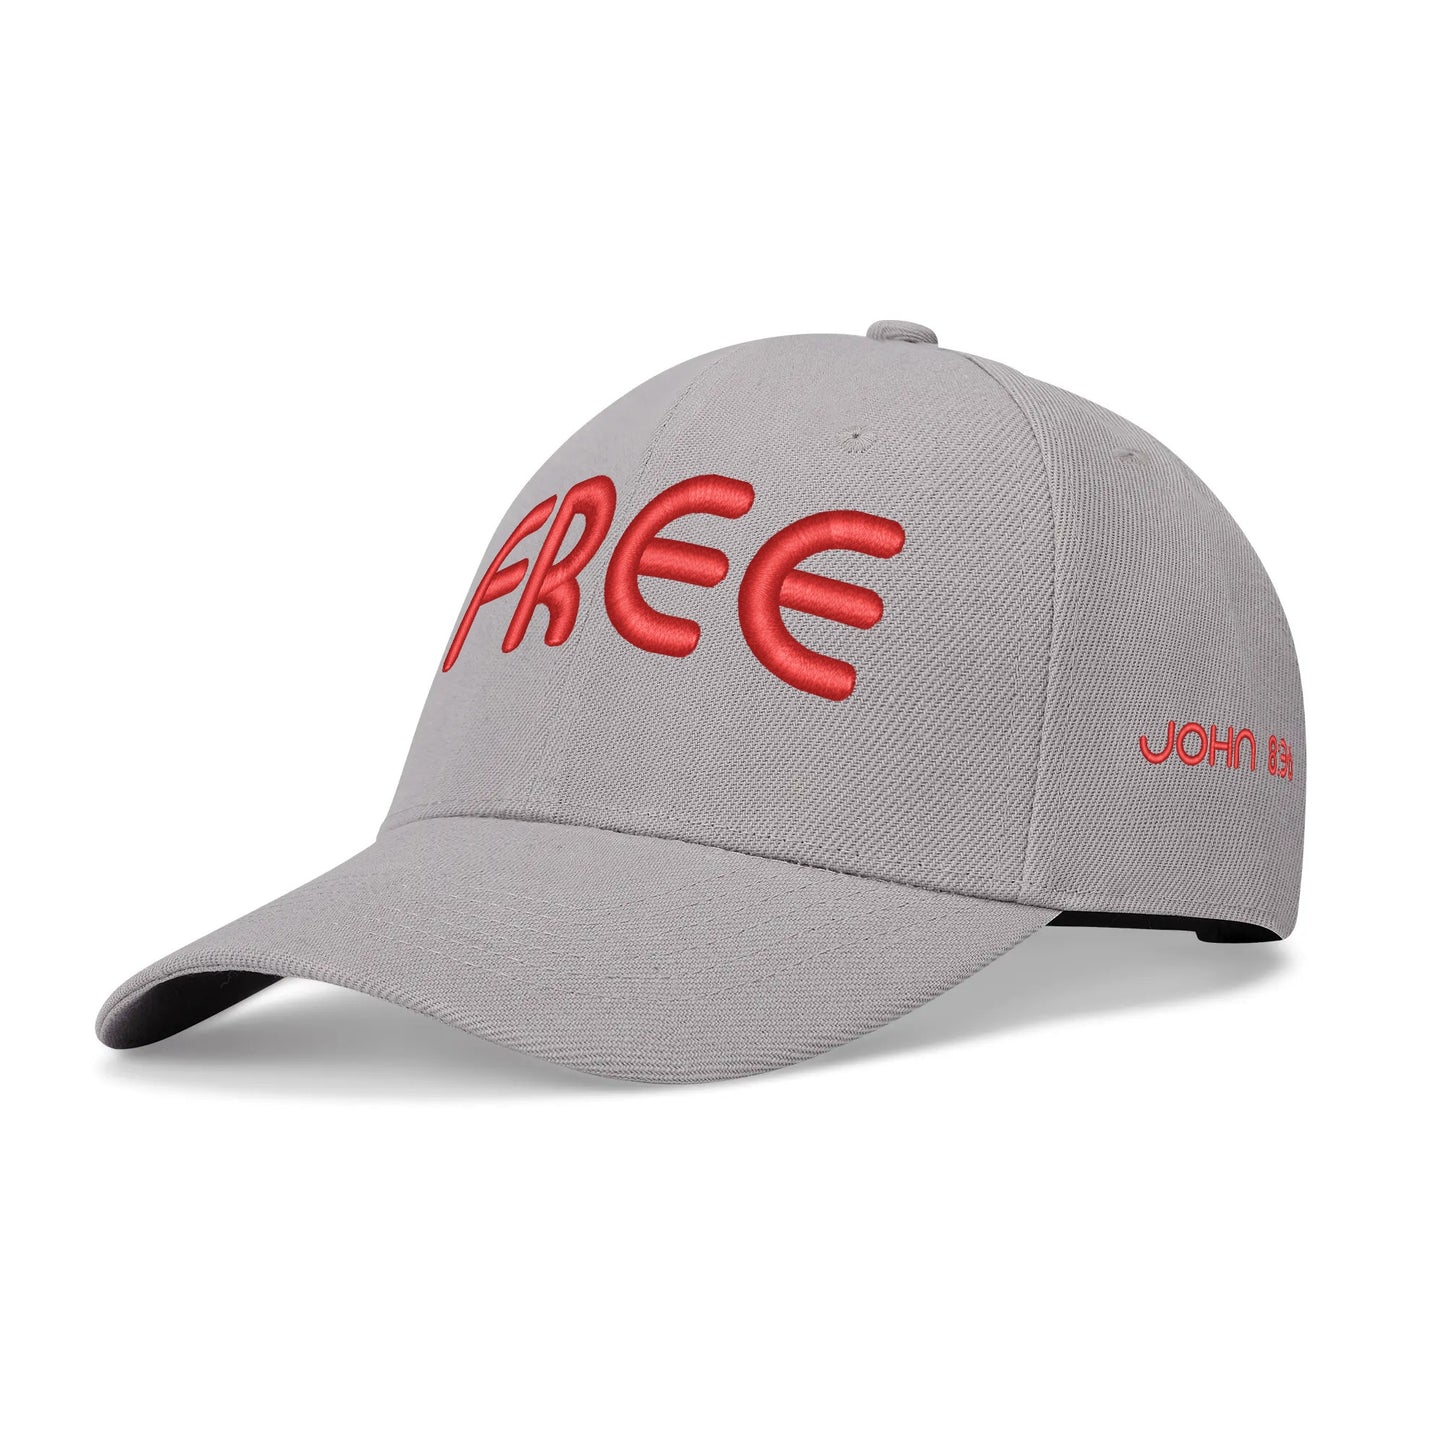 FREE INDEED- Four Sides Embroidered Adjustable Flat Baseball Cap, FREE SHIPPING